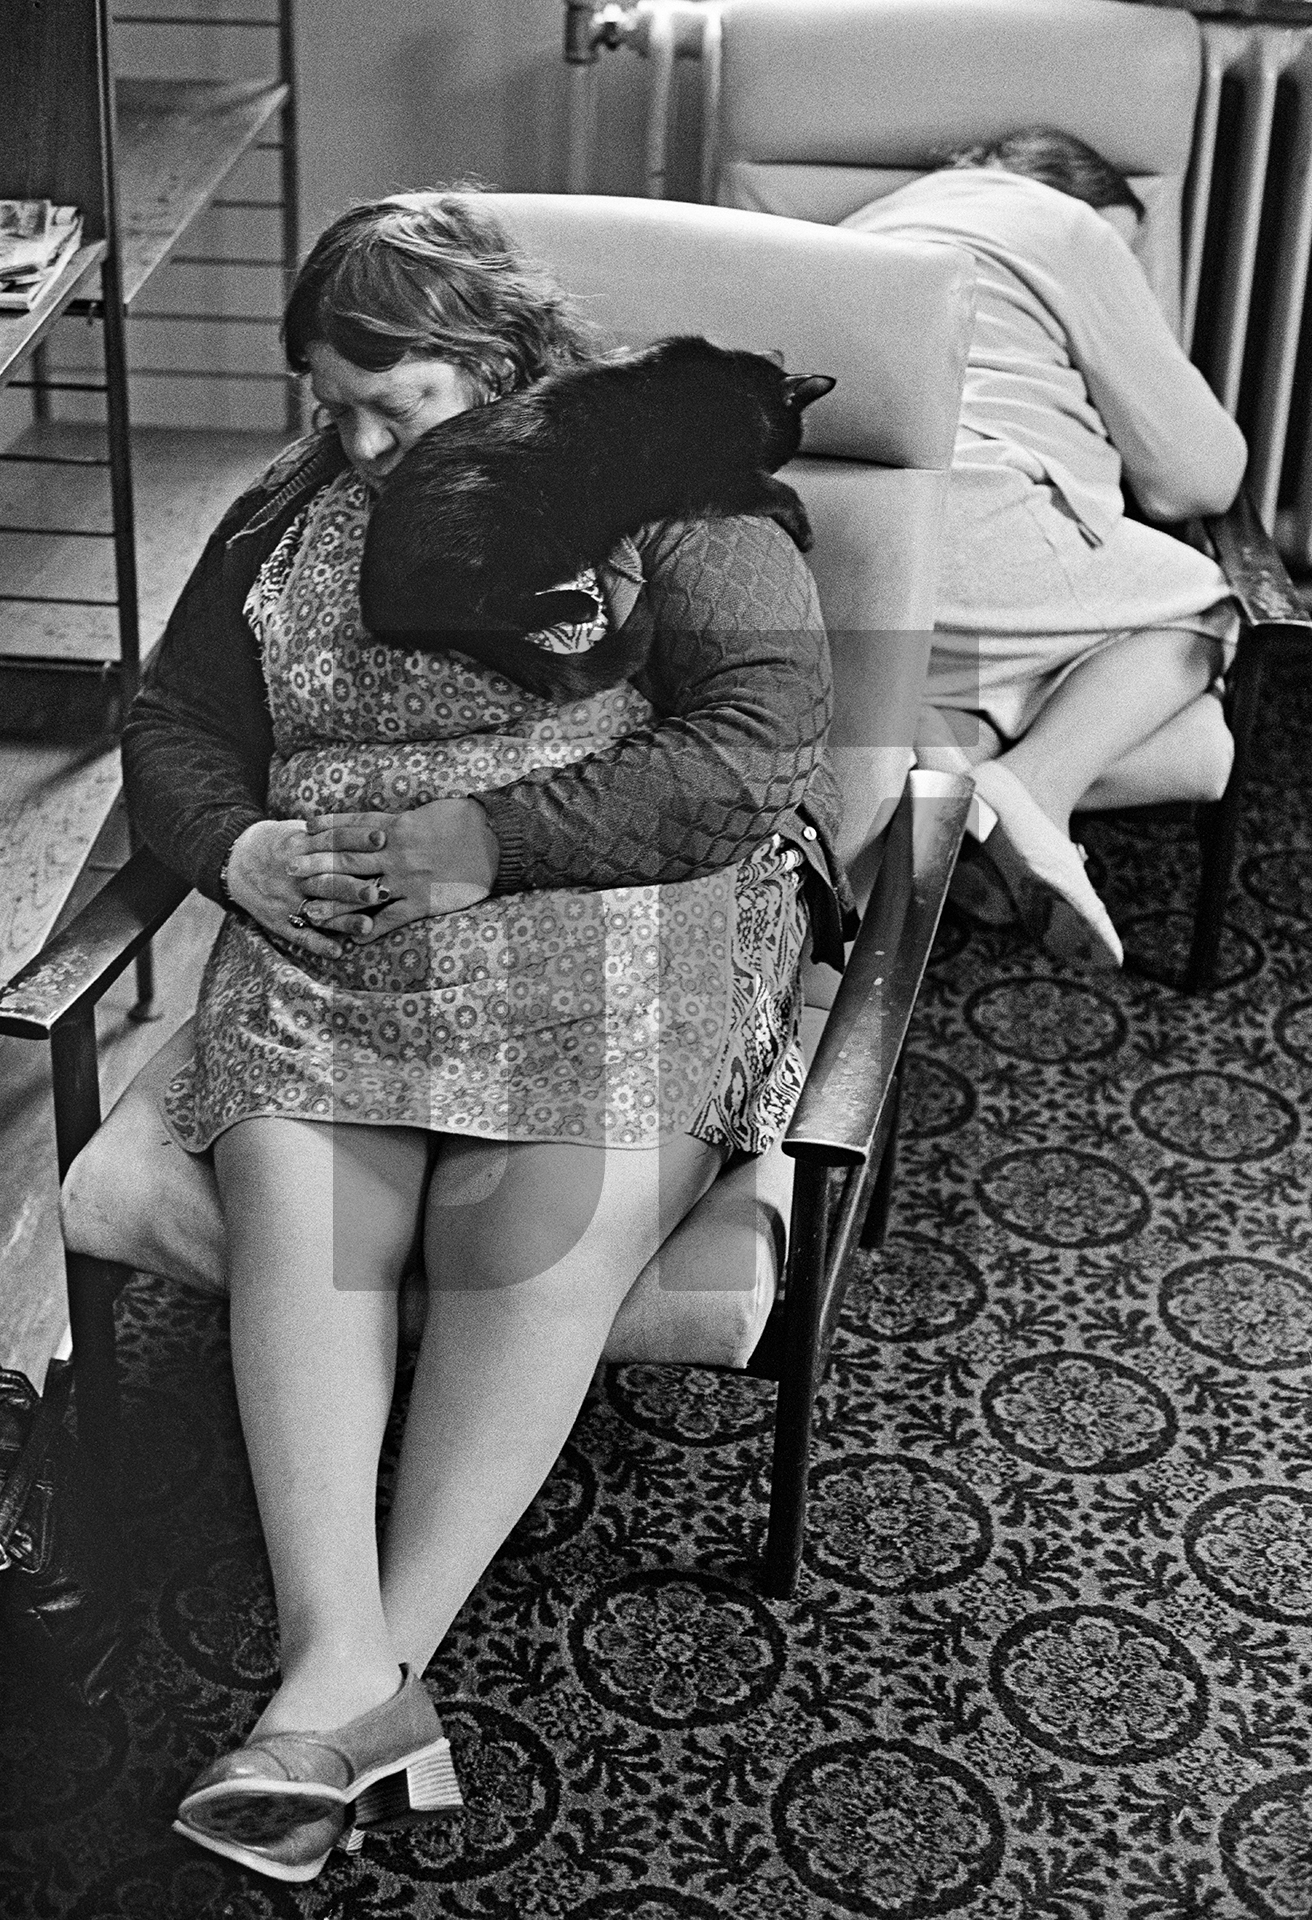 Former housewives Evelyn Clarke (with the ward cat) and Elizabeth Irving, both aged 54. February 1978 by Daniel Meadows